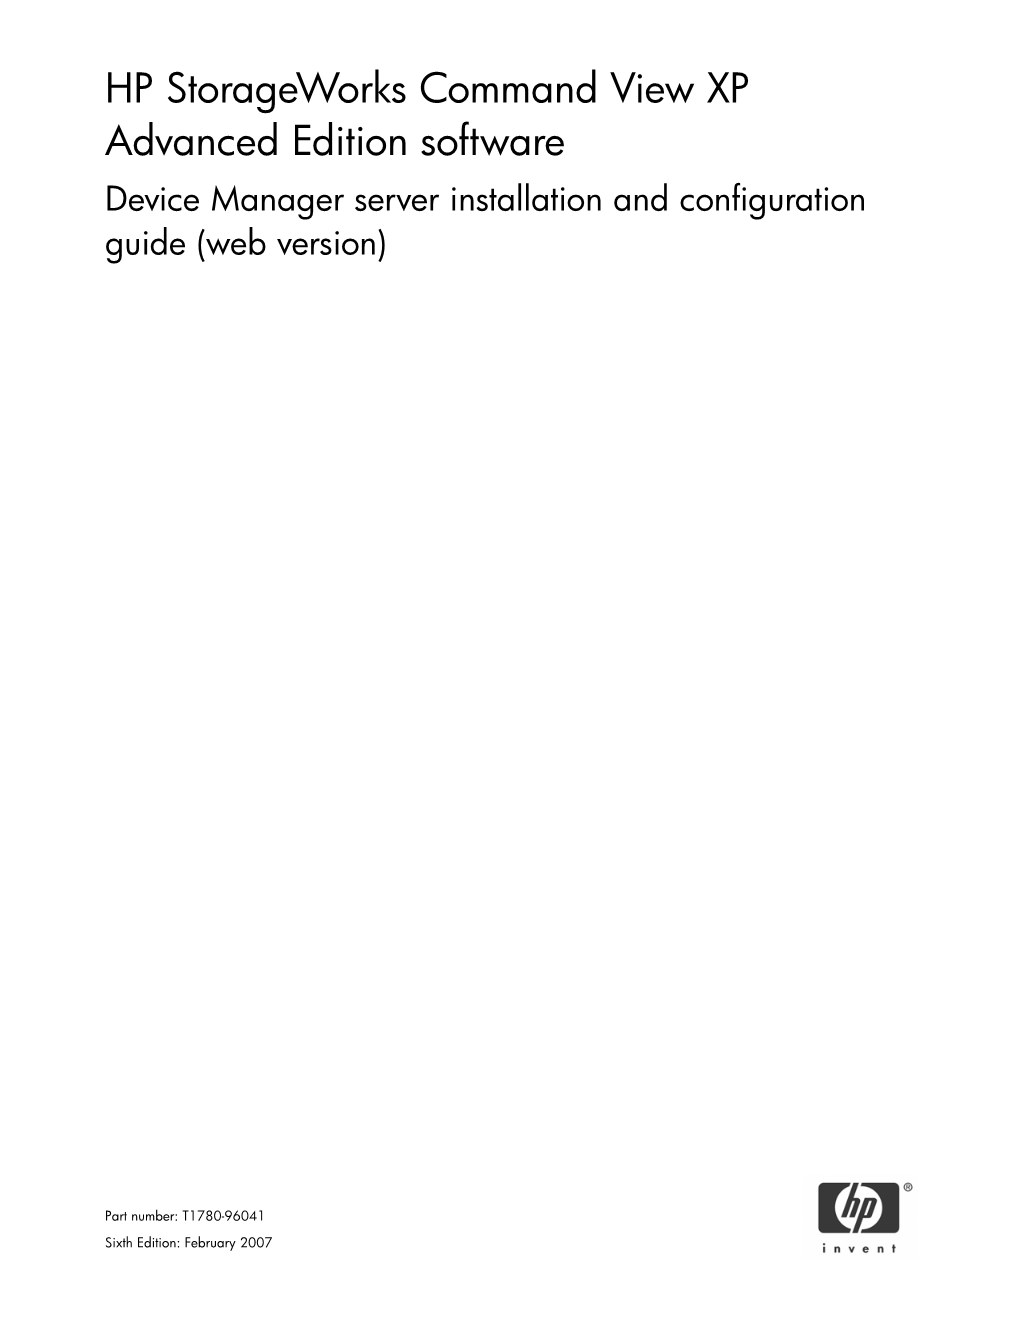 Device Manager Server Installation and Configuration Guide (Web Version)